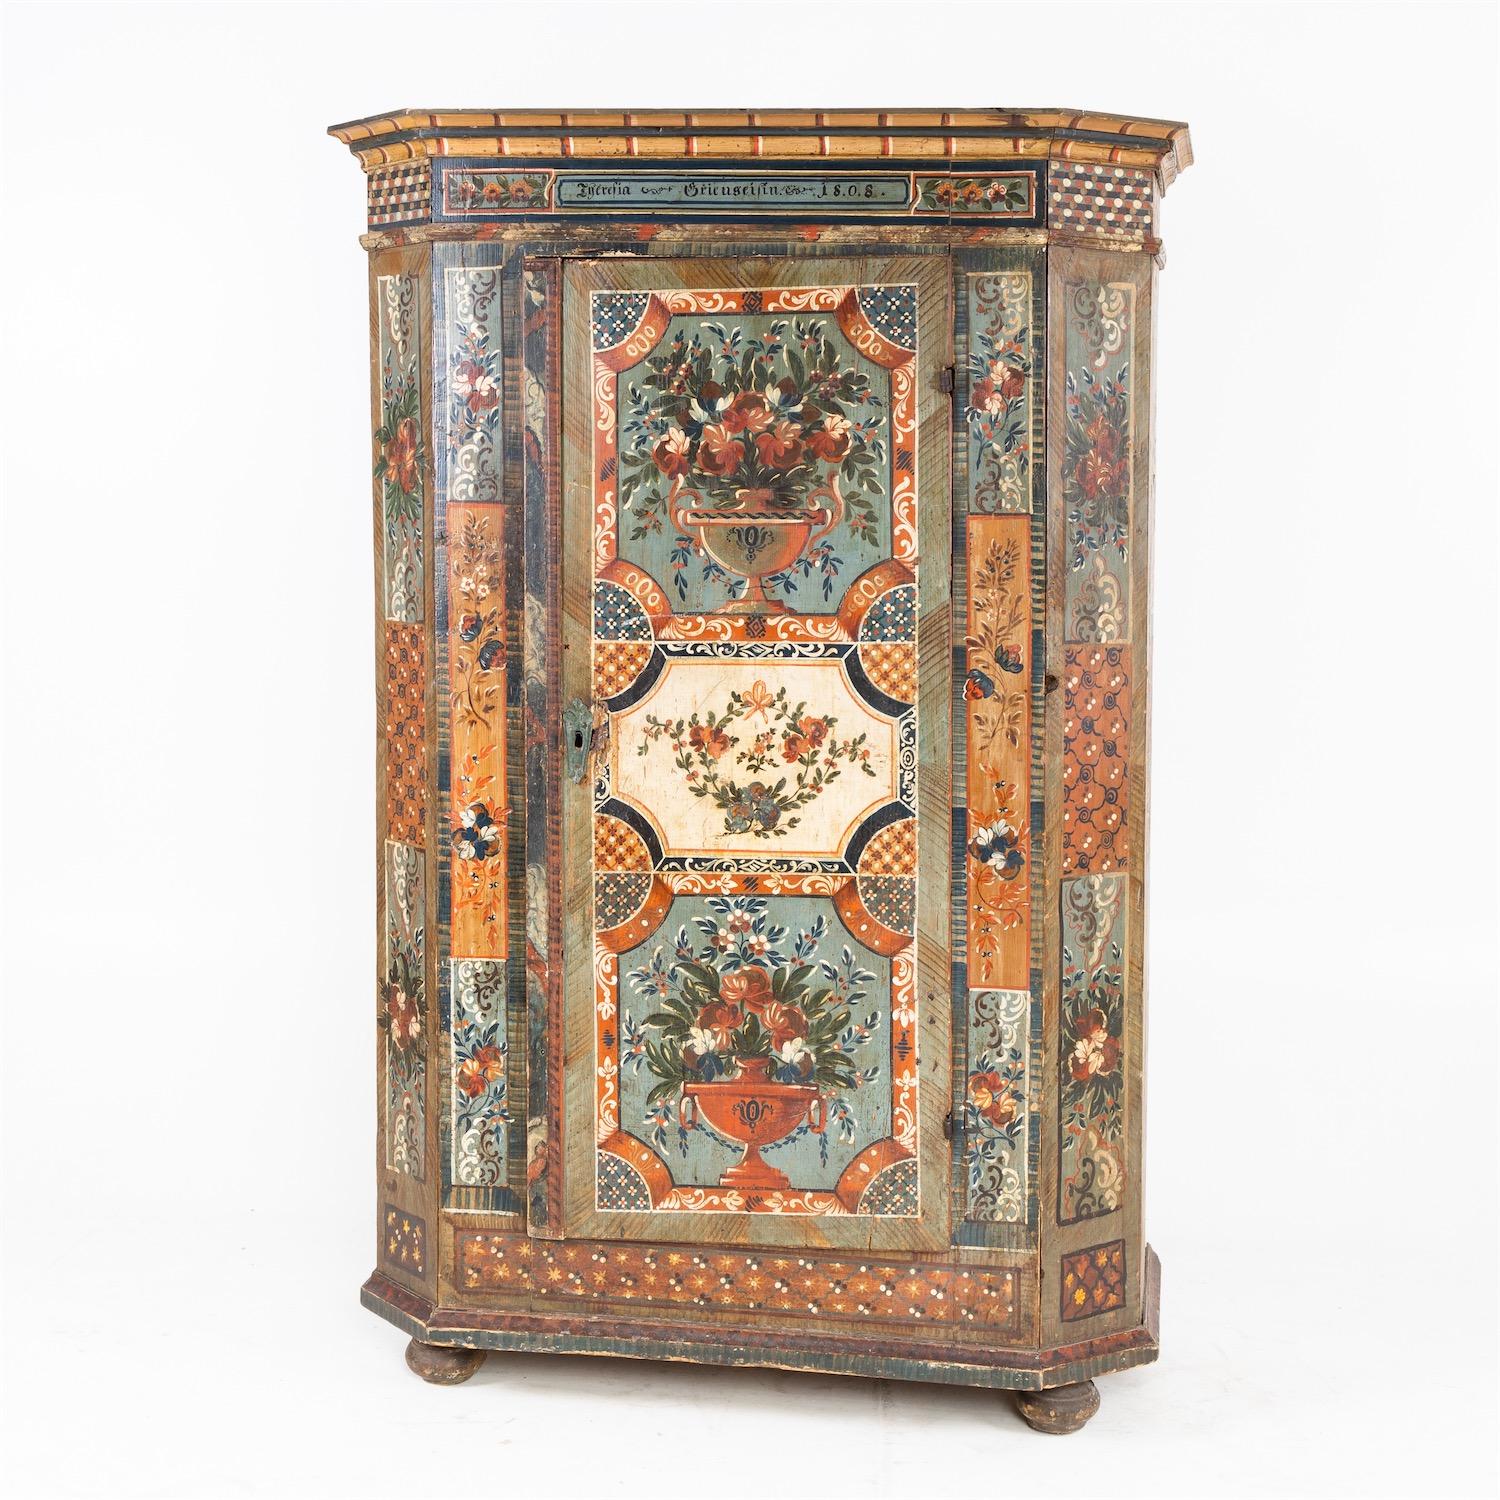 Provincial cupboard with beveled corners and profiled cornice standing on bun feet. The single-door body is painted on all sides and shows floral bouquets in paneled frames. The cornice bears the inscription in a cartouche field: 